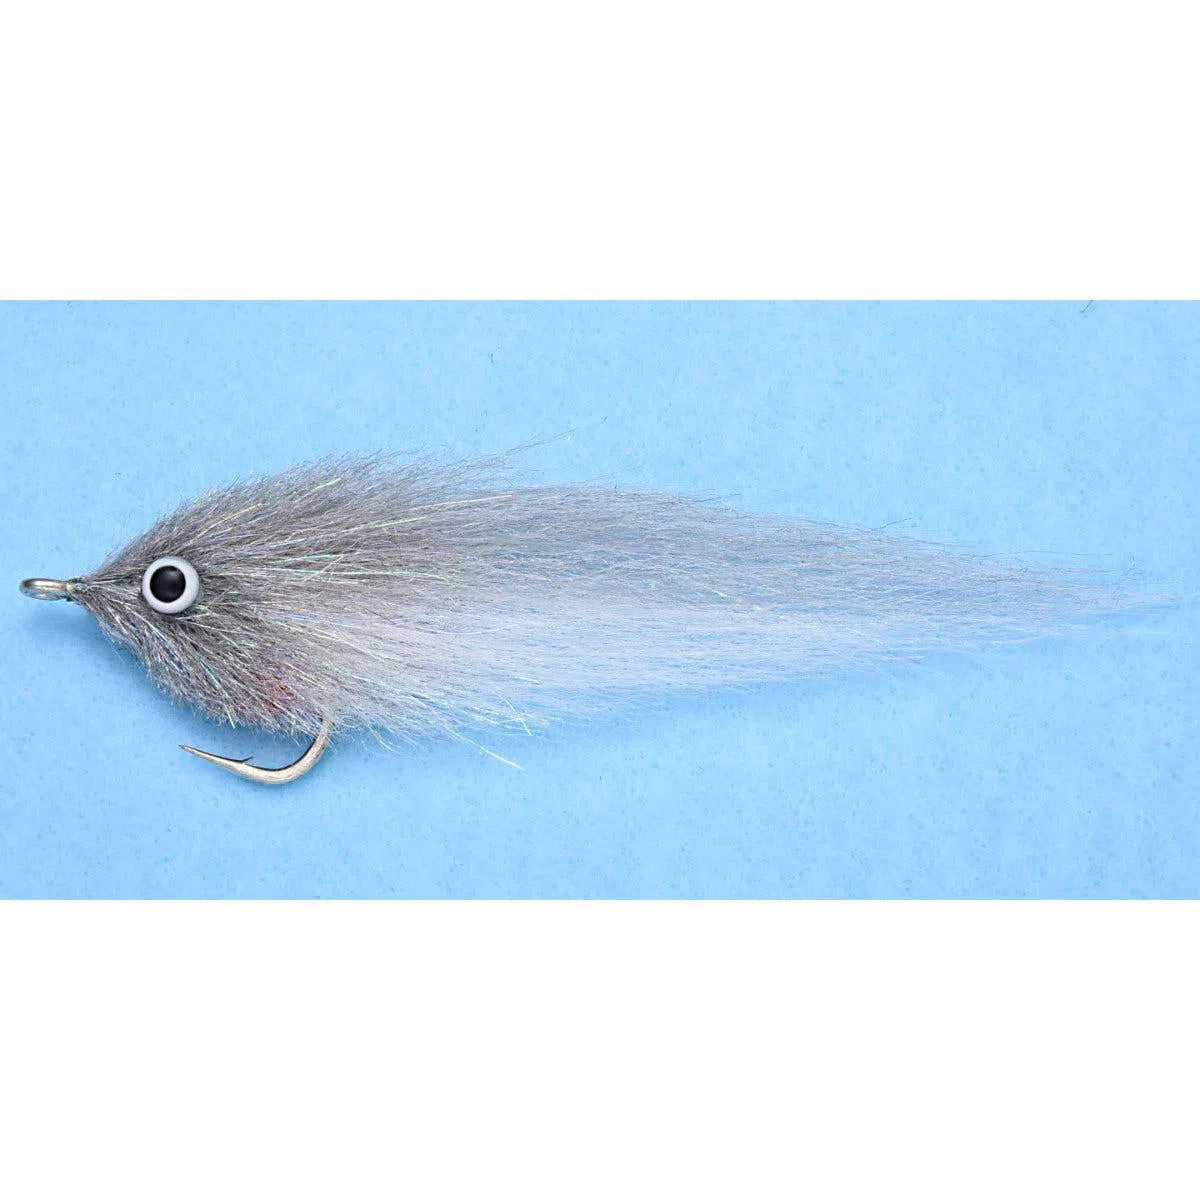 Enrico Puglisi EP GT Baitfish Fly-Lure - Saltwater Fly-Enrico Puglisi-Grey-Size #8/0-Fishing Station